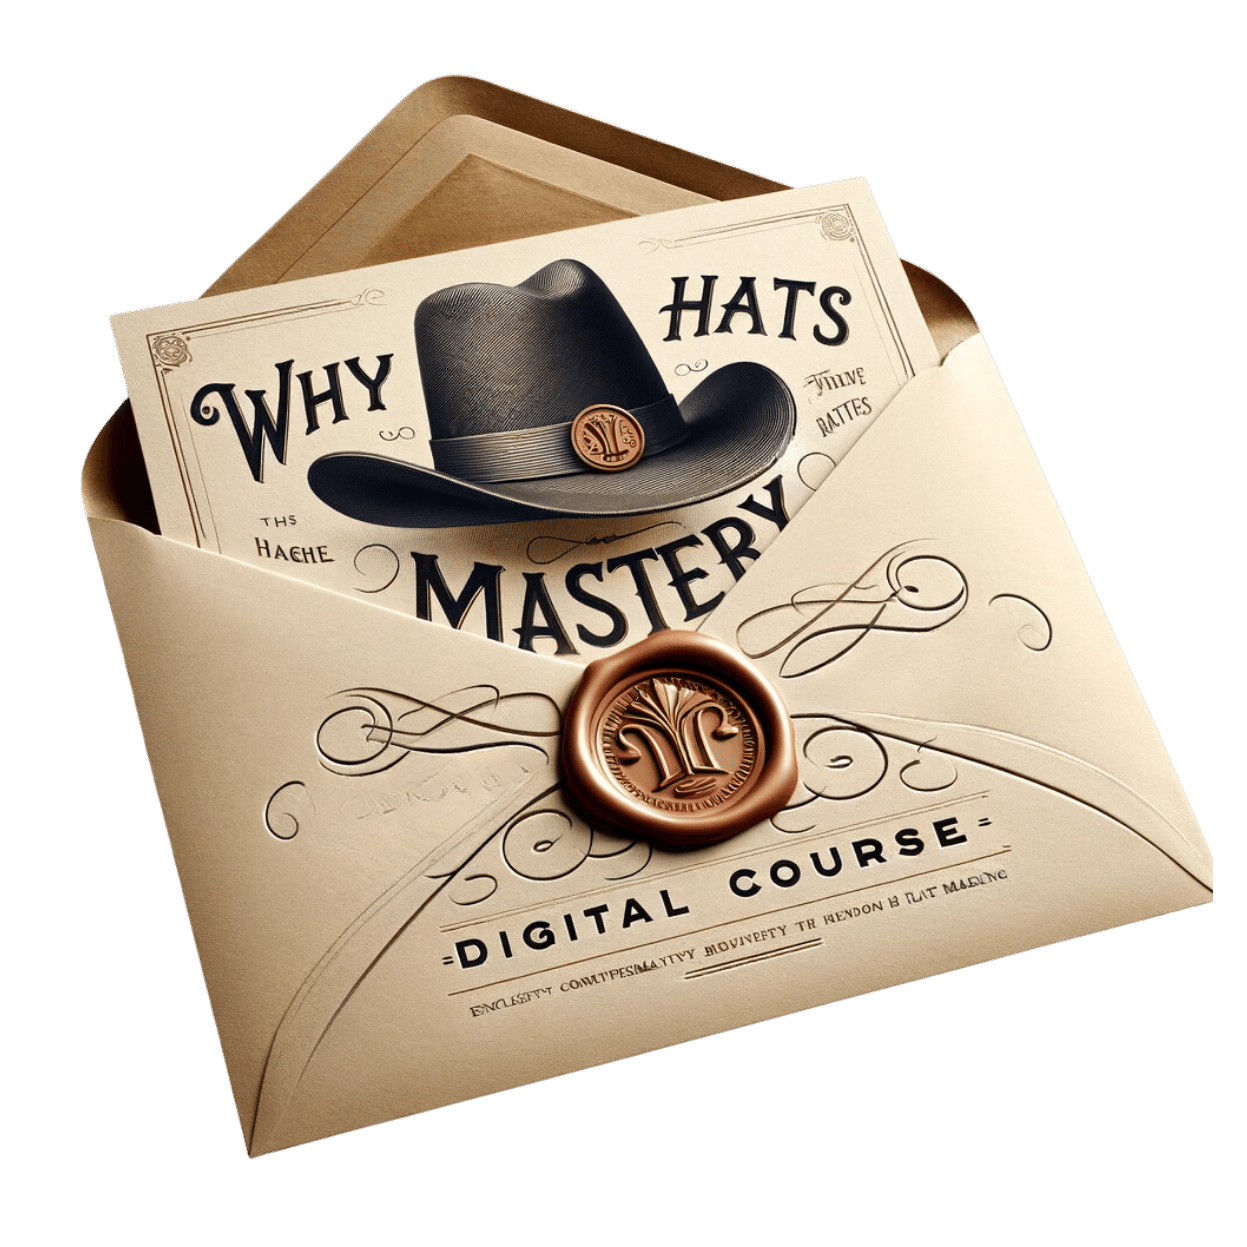 Whyhats' Hat Mastery Course